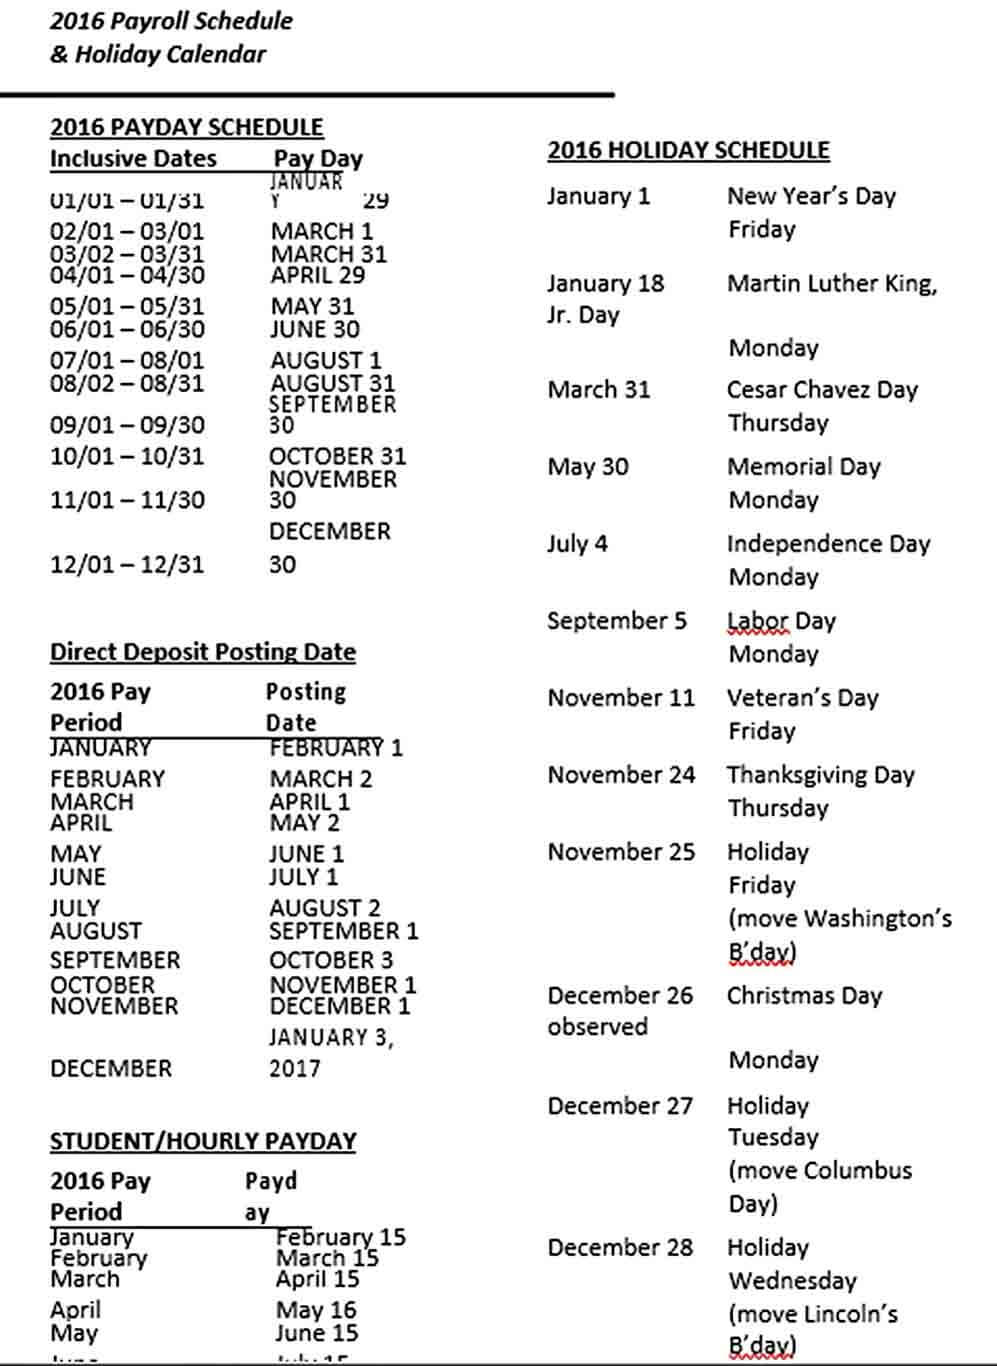 Holiday Payroll Schedule